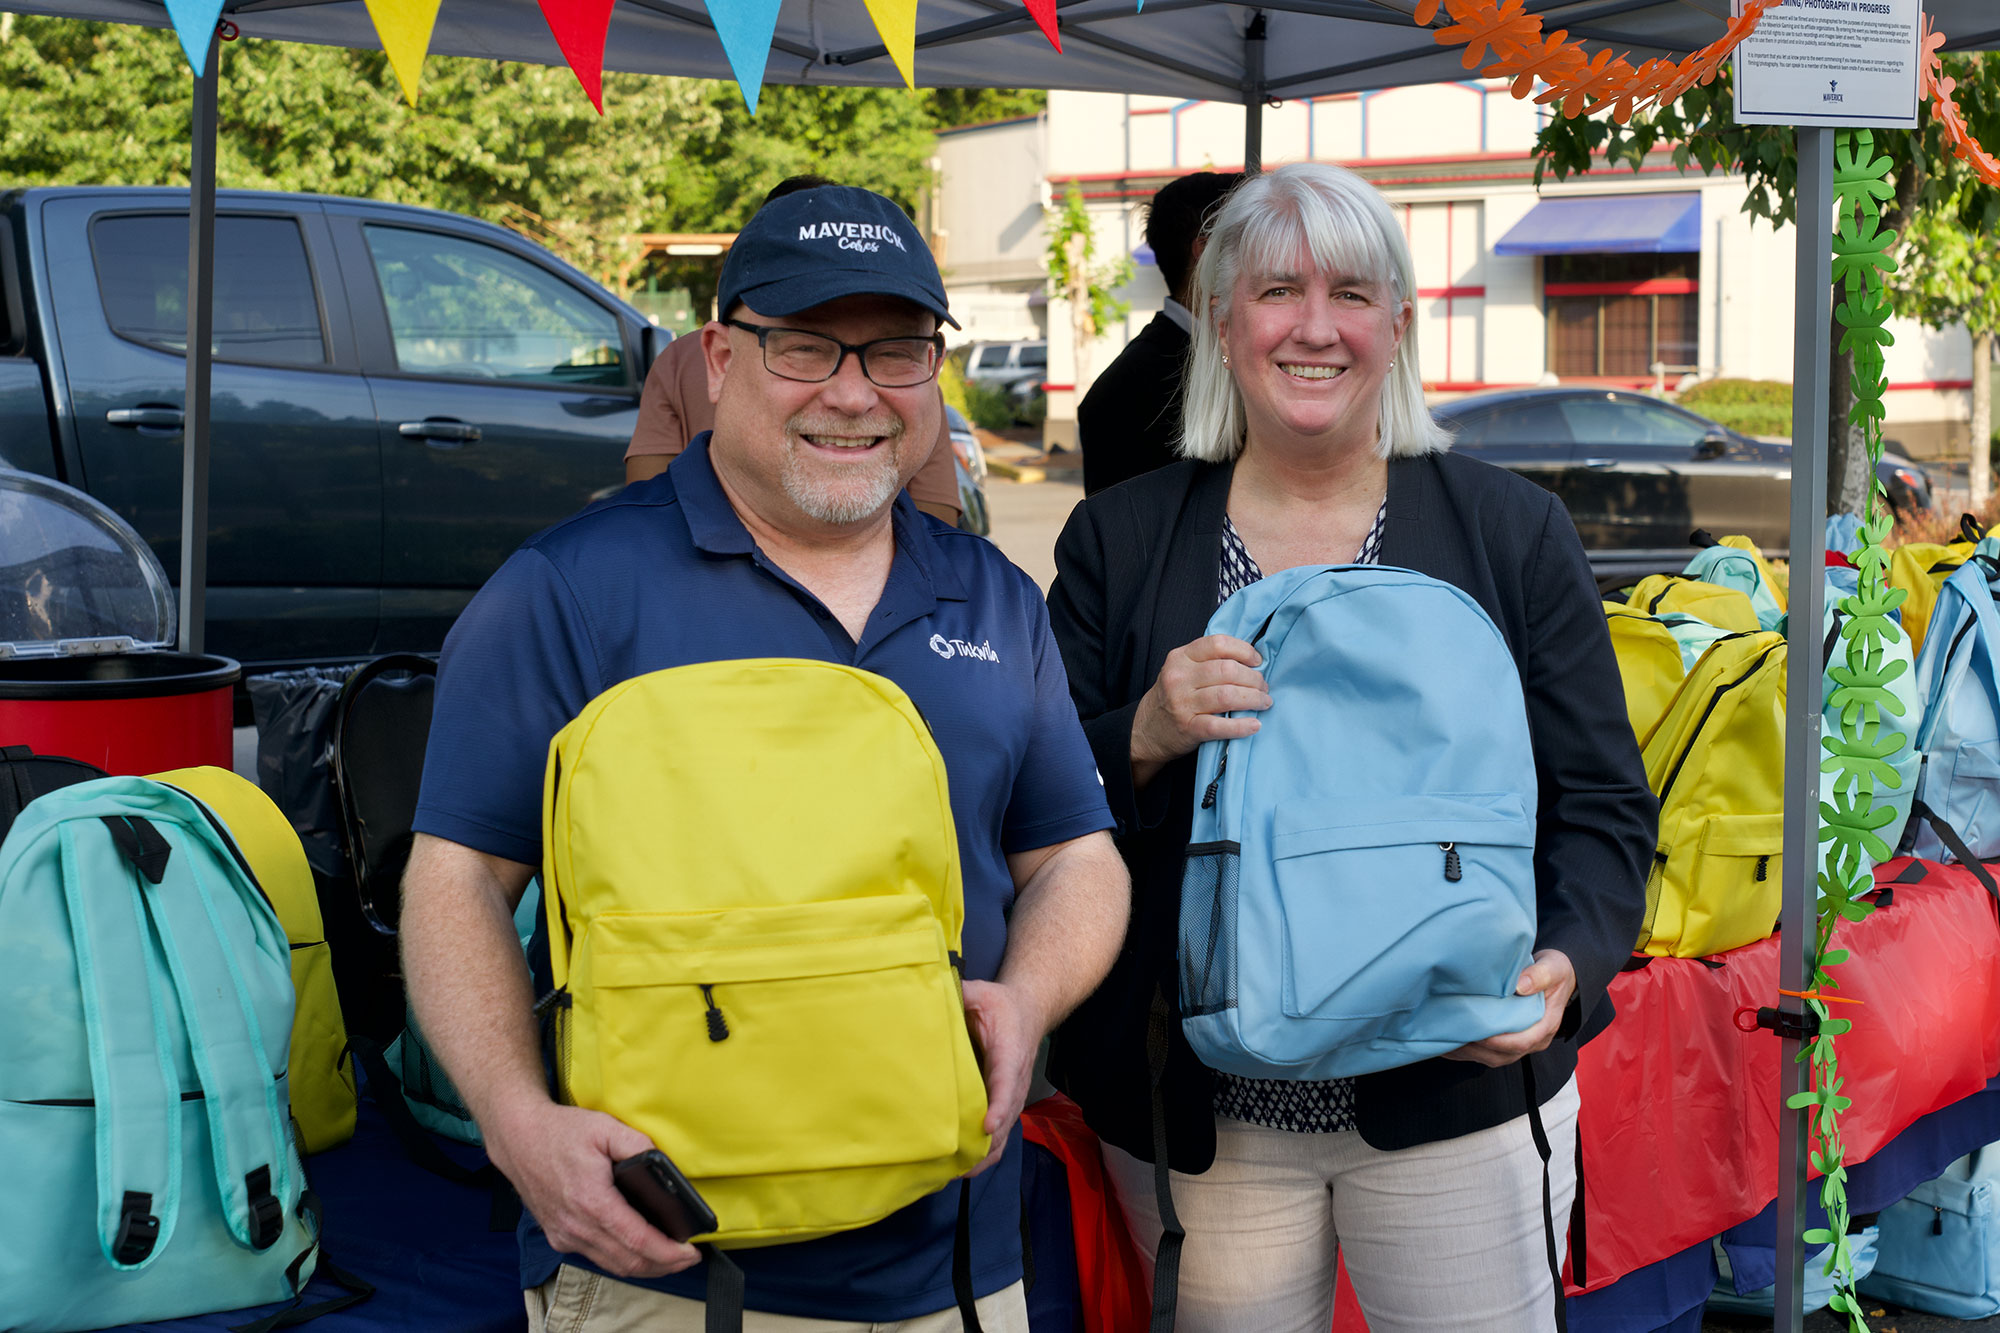 A woman and a man smiling holding backpacks